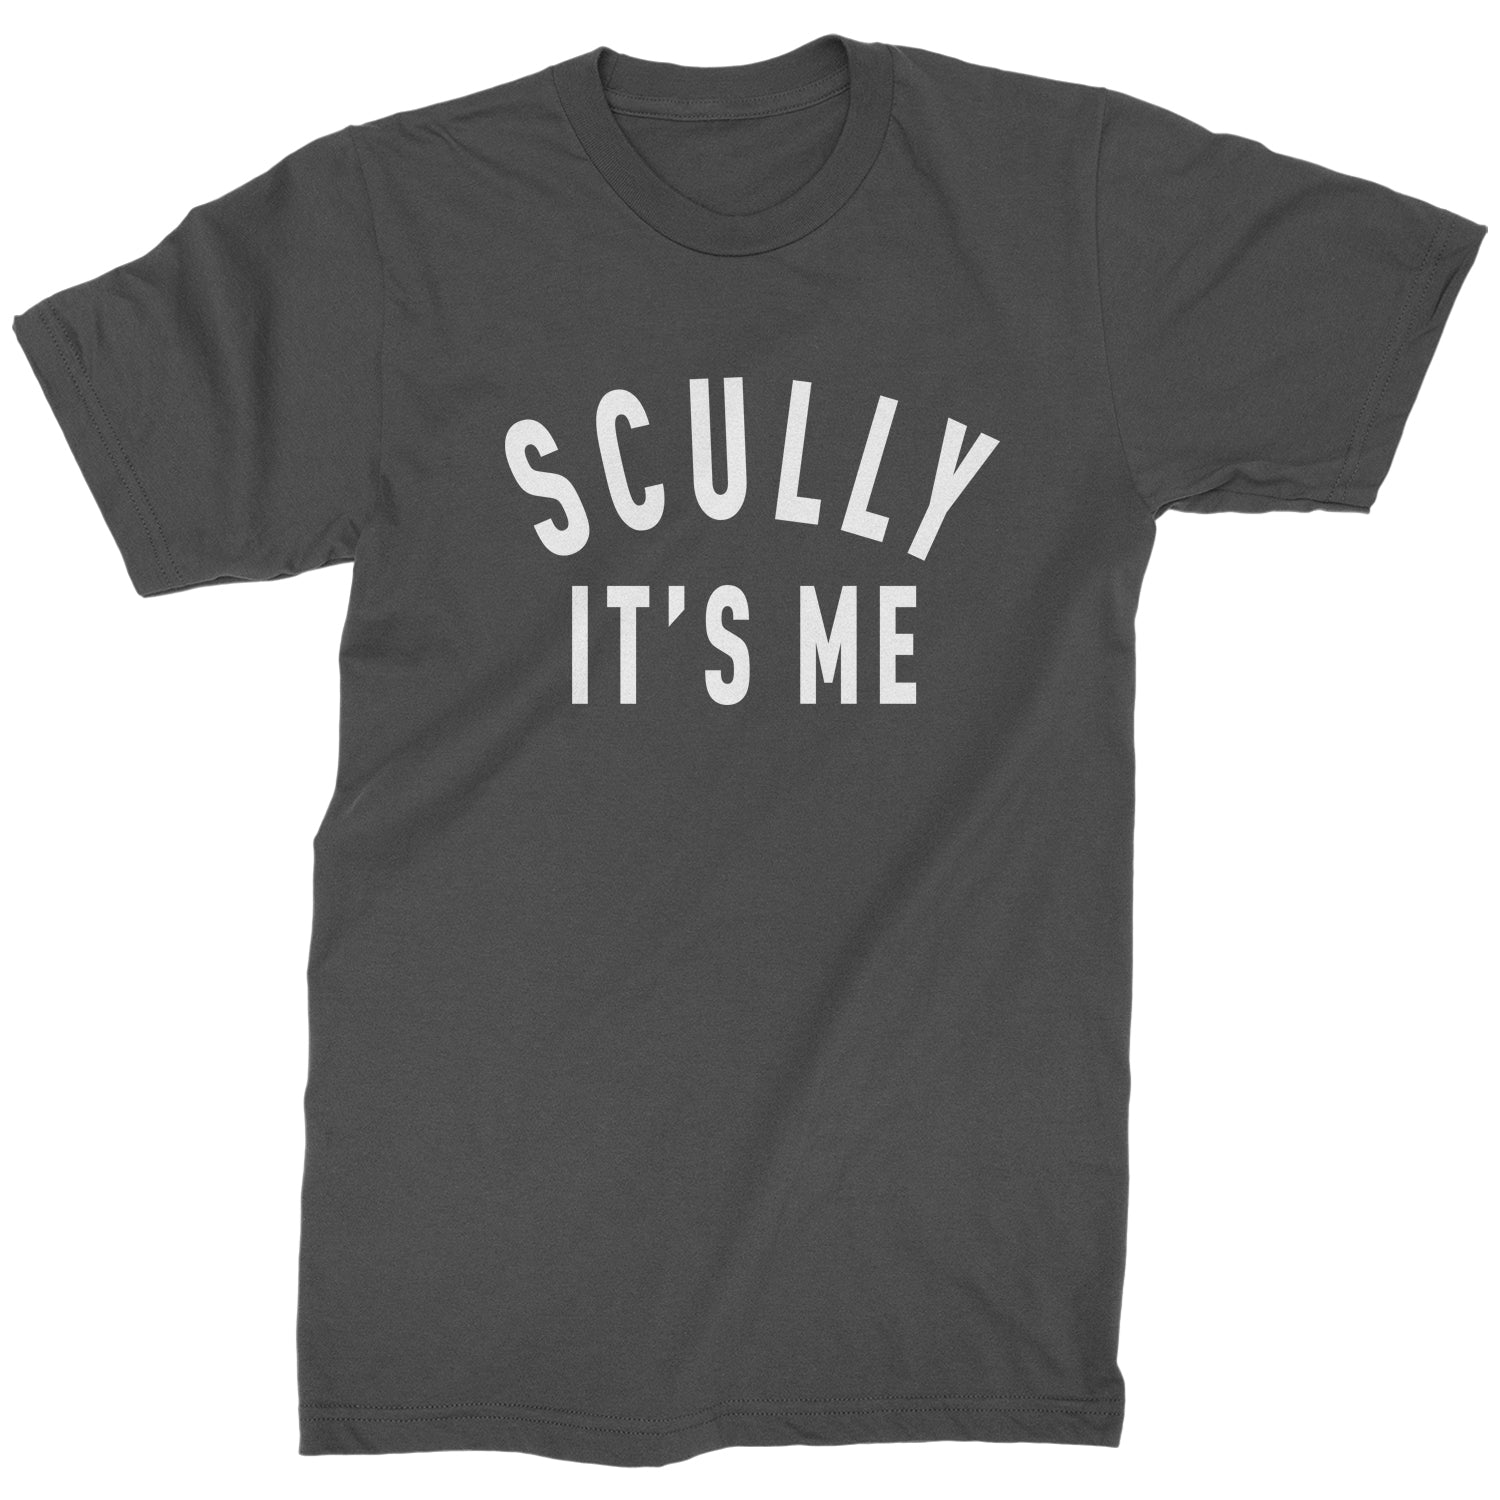 Scully, It's Me Mens T-shirt #expressiontees by Expression Tees